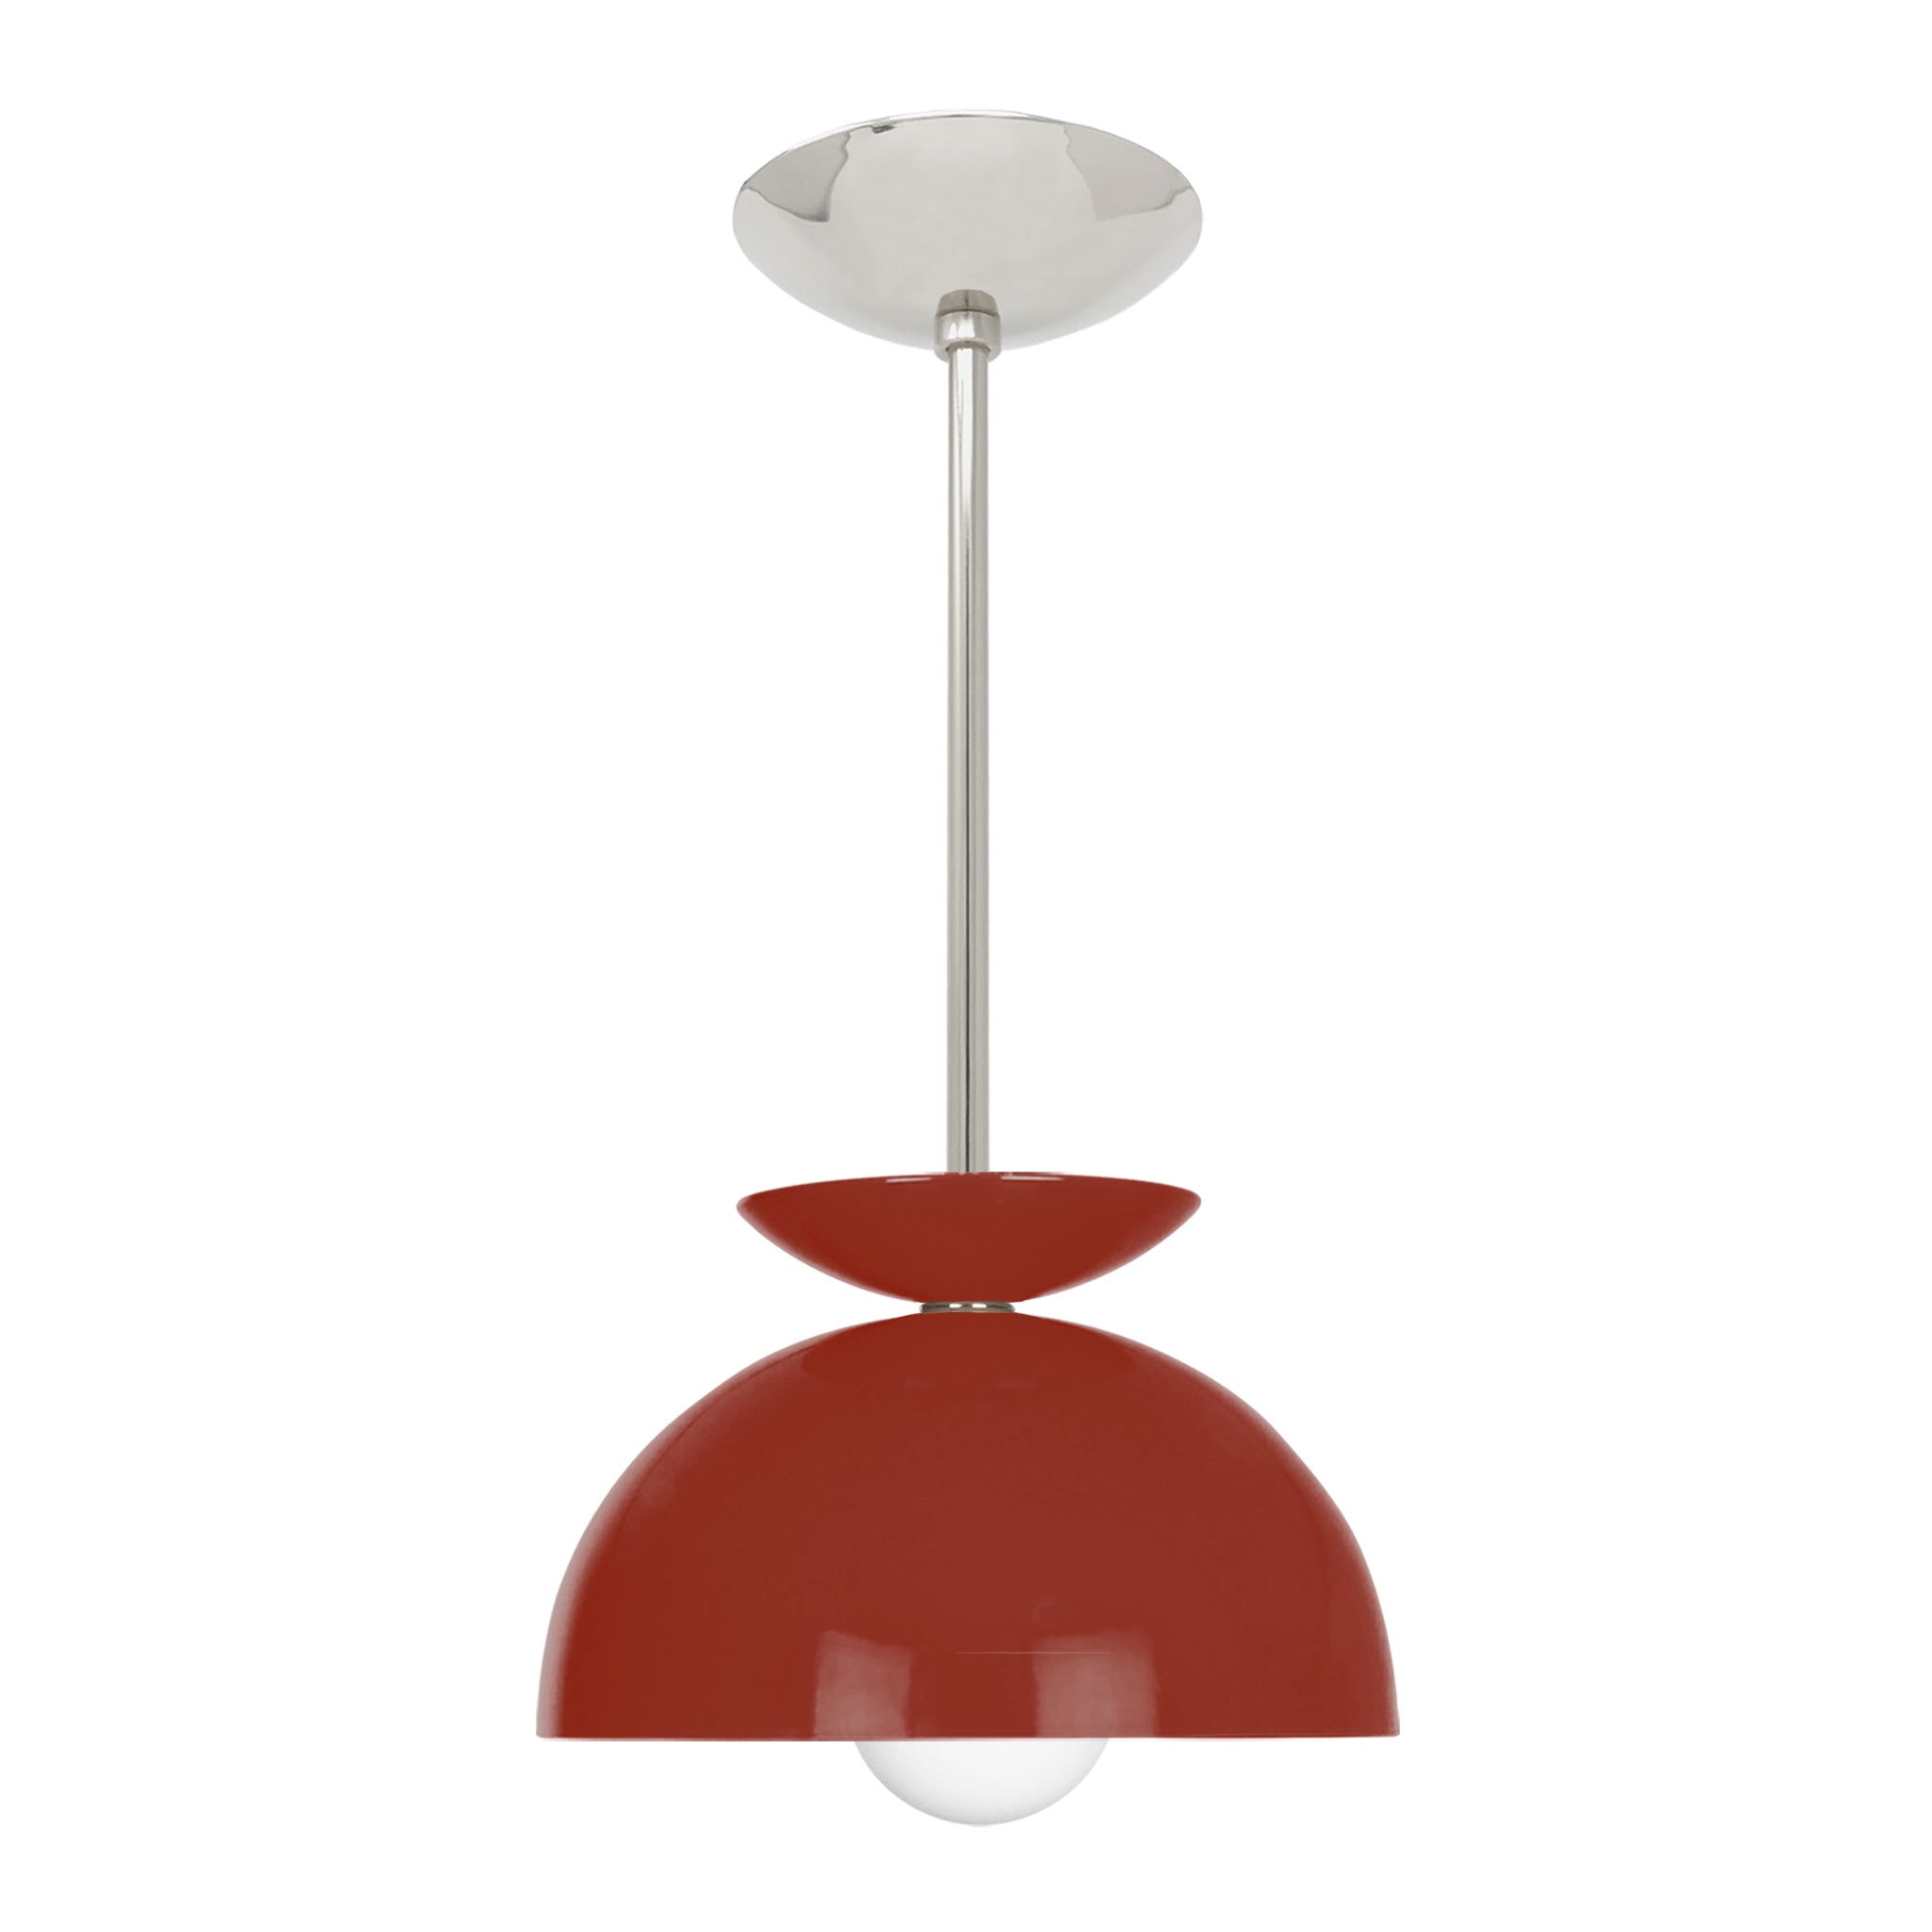 Nickel and ochre color Echo pendant 10" Dutton Brown lighting